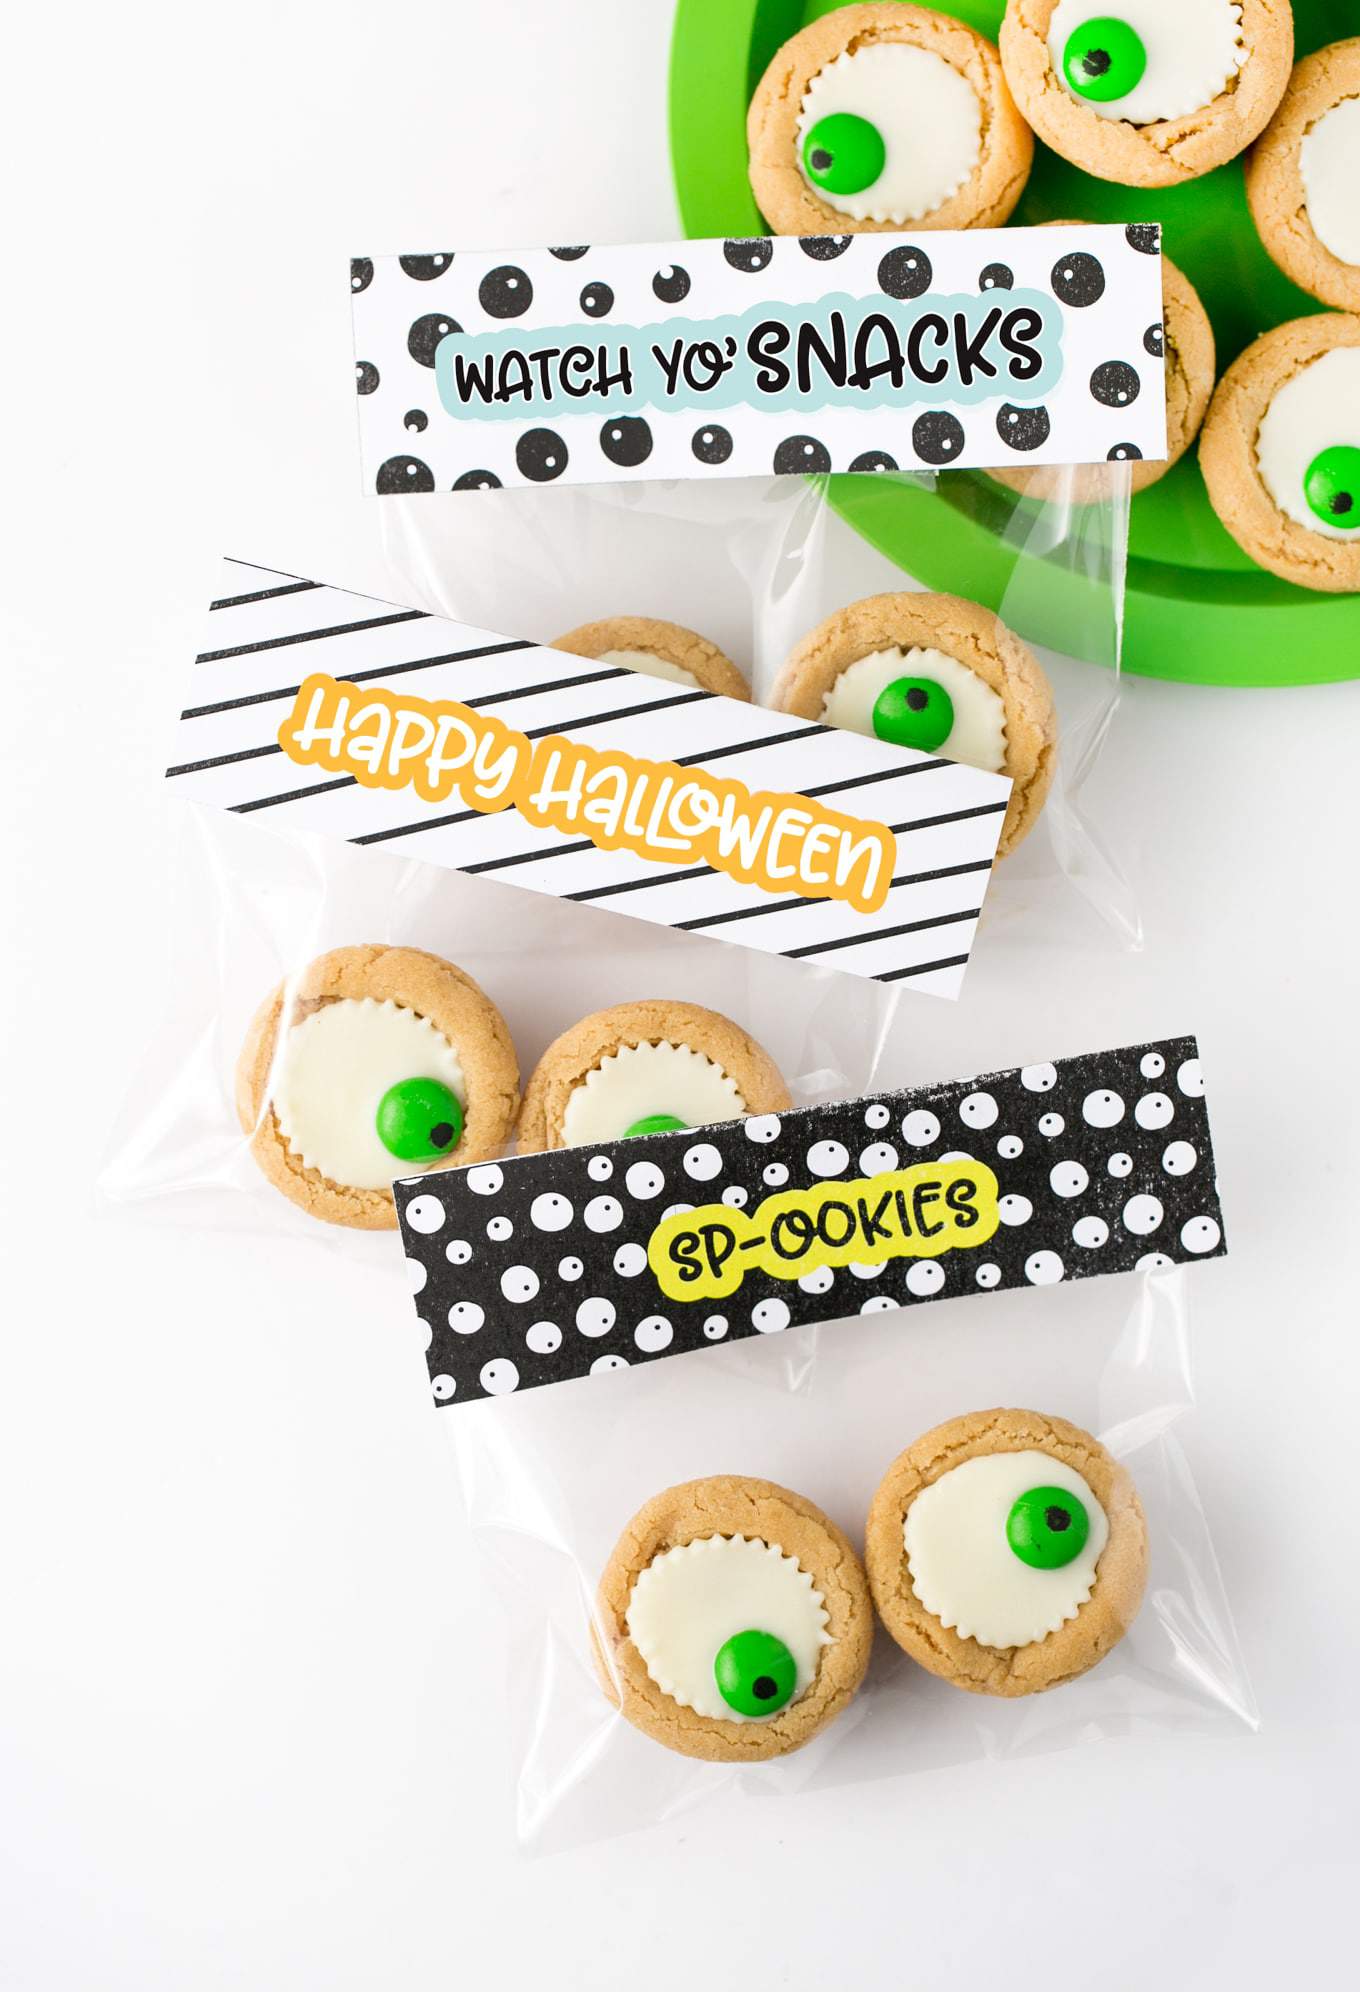 How cute are these? Attach these printable Halloween treat bag toppers with eyeball cookie cups for an easy Halloween party favor idea! Perfect for classroom gifts, coworker treats, or Halloween party favors. #Printable #Halloween | www.DesignEatRepeat.com